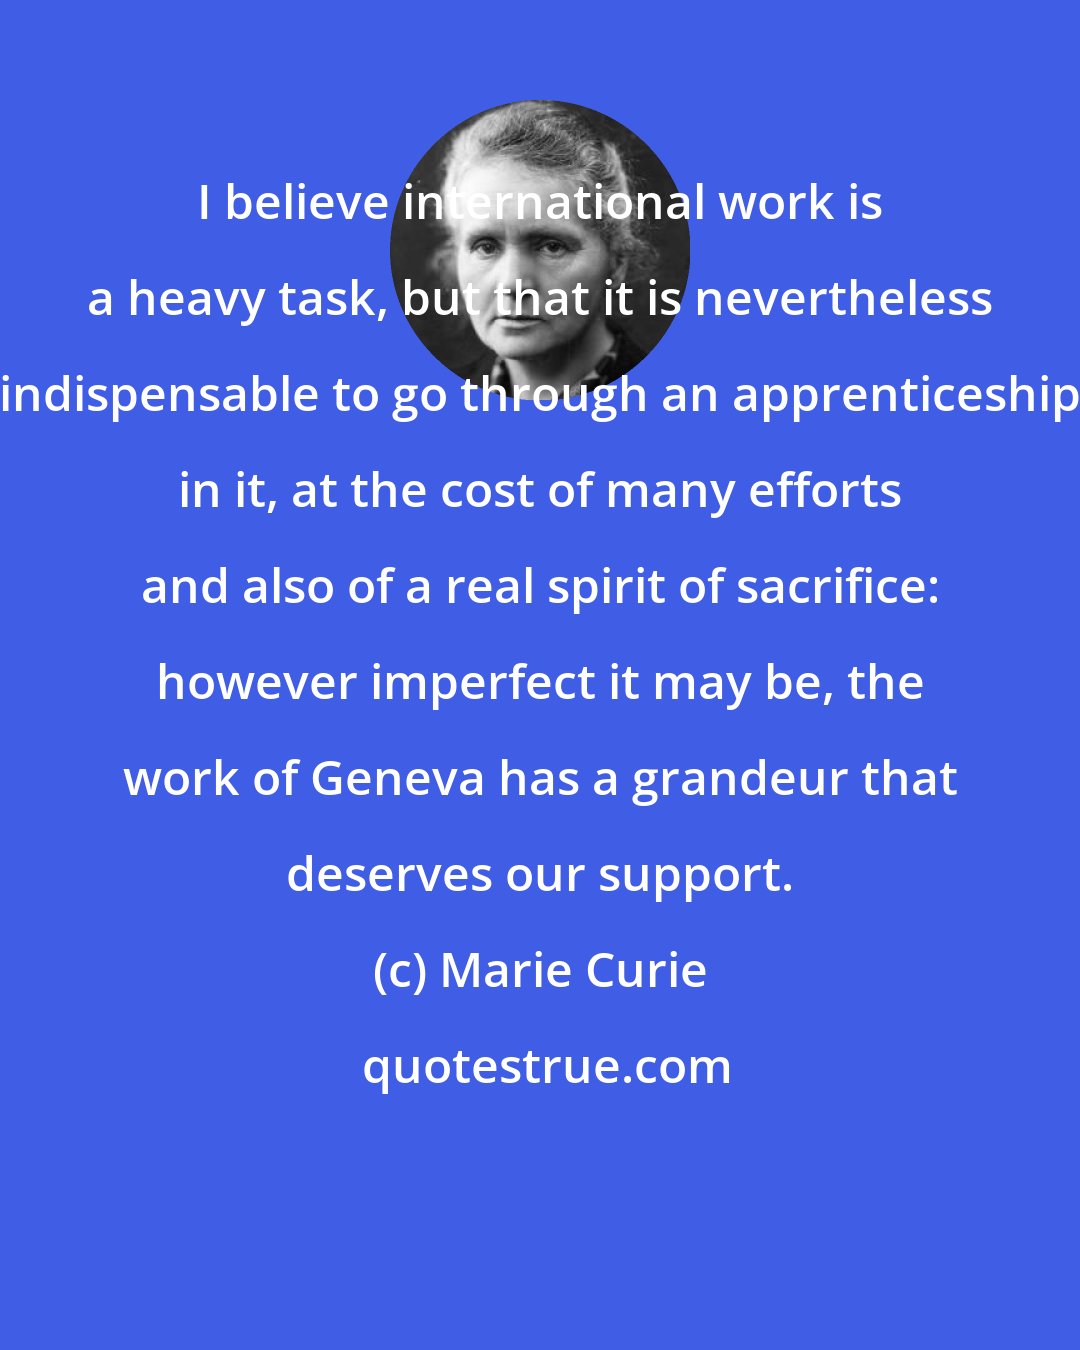 Marie Curie: I believe international work is a heavy task, but that it is nevertheless indispensable to go through an apprenticeship in it, at the cost of many efforts and also of a real spirit of sacrifice: however imperfect it may be, the work of Geneva has a grandeur that deserves our support.